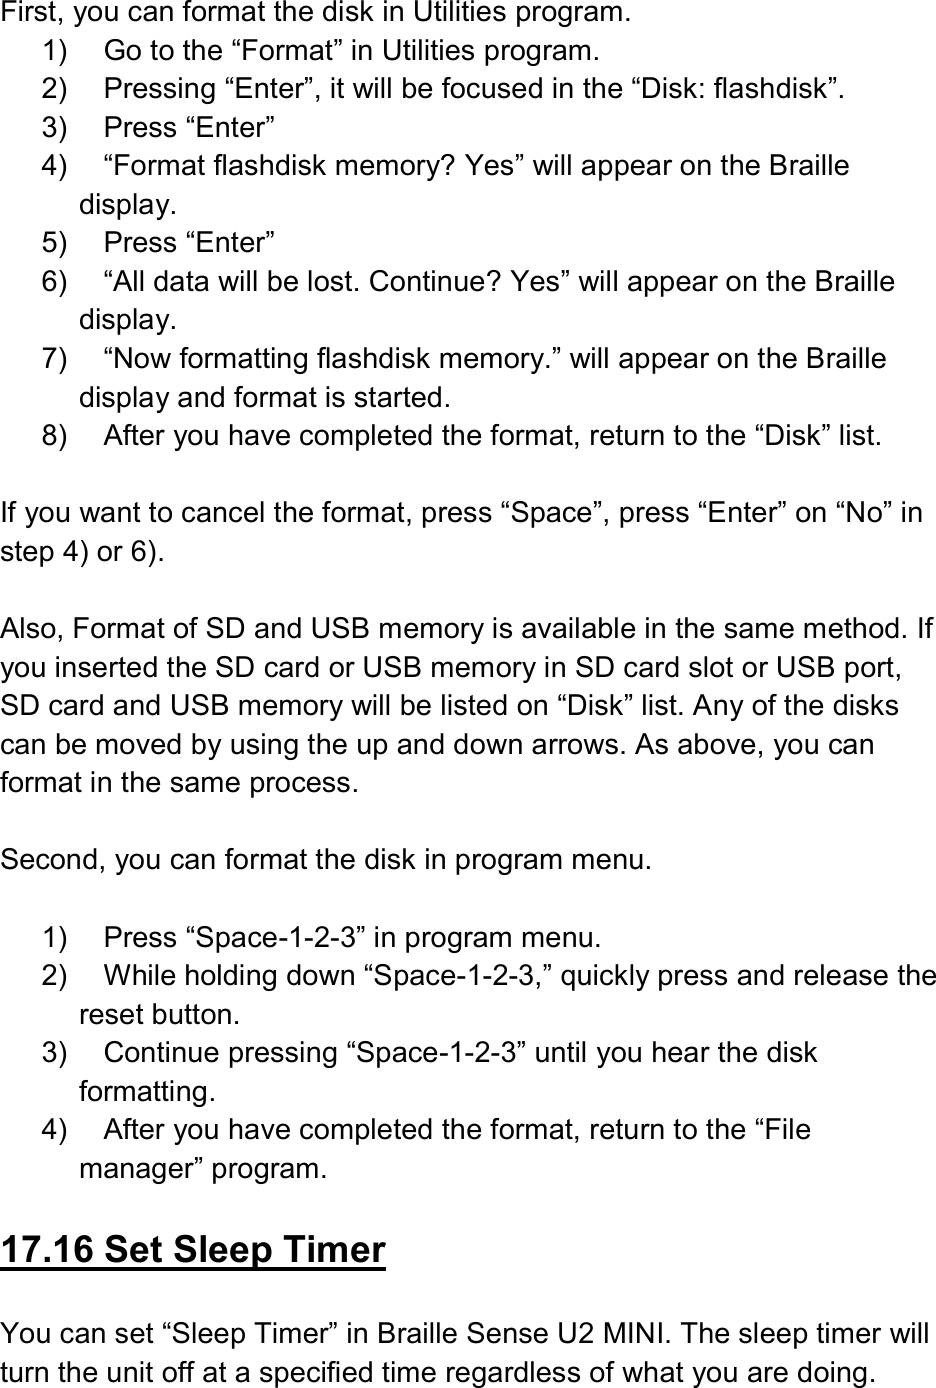  First, you can format the disk in Utilities program. 1)  Go to the “Format” in Utilities program. 2)  Pressing “Enter”, it will be focused in the “Disk: flashdisk”. 3)  Press “Enter” 4)  “Format flashdisk memory? Yes” will appear on the Braille display. 5)  Press “Enter” 6)  “All data will be lost. Continue? Yes” will appear on the Braille display. 7)  “Now formatting flashdisk memory.” will appear on the Braille display and format is started. 8)  After you have completed the format, return to the “Disk” list.  If you want to cancel the format, press “Space”, press “Enter” on “No” in step 4) or 6).  Also, Format of SD and USB memory is available in the same method. If you inserted the SD card or USB memory in SD card slot or USB port, SD card and USB memory will be listed on “Disk” list. Any of the disks can be moved by using the up and down arrows. As above, you can format in the same process.  Second, you can format the disk in program menu.  1)  Press “Space-1-2-3” in program menu. 2)  While holding down “Space-1-2-3,” quickly press and release the reset button. 3)  Continue pressing “Space-1-2-3” until you hear the disk formatting. 4)  After you have completed the format, return to the “File manager” program.  17.16 Set Sleep Timer  You can set “Sleep Timer” in Braille Sense U2 MINI. The sleep timer will turn the unit off at a specified time regardless of what you are doing. 